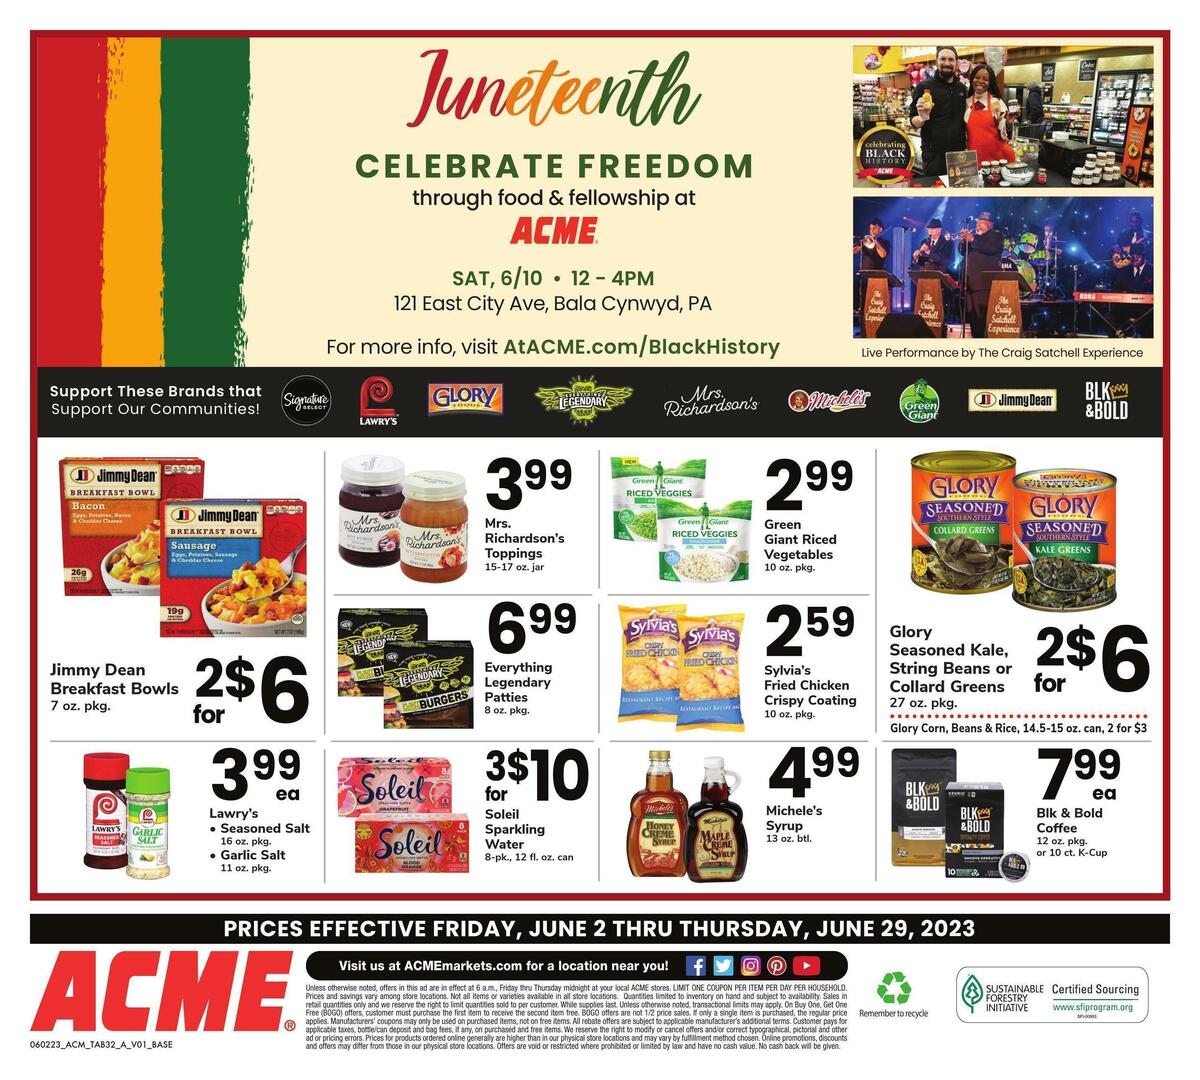 ACME Markets Big Book of Savings Weekly Ad from June 2